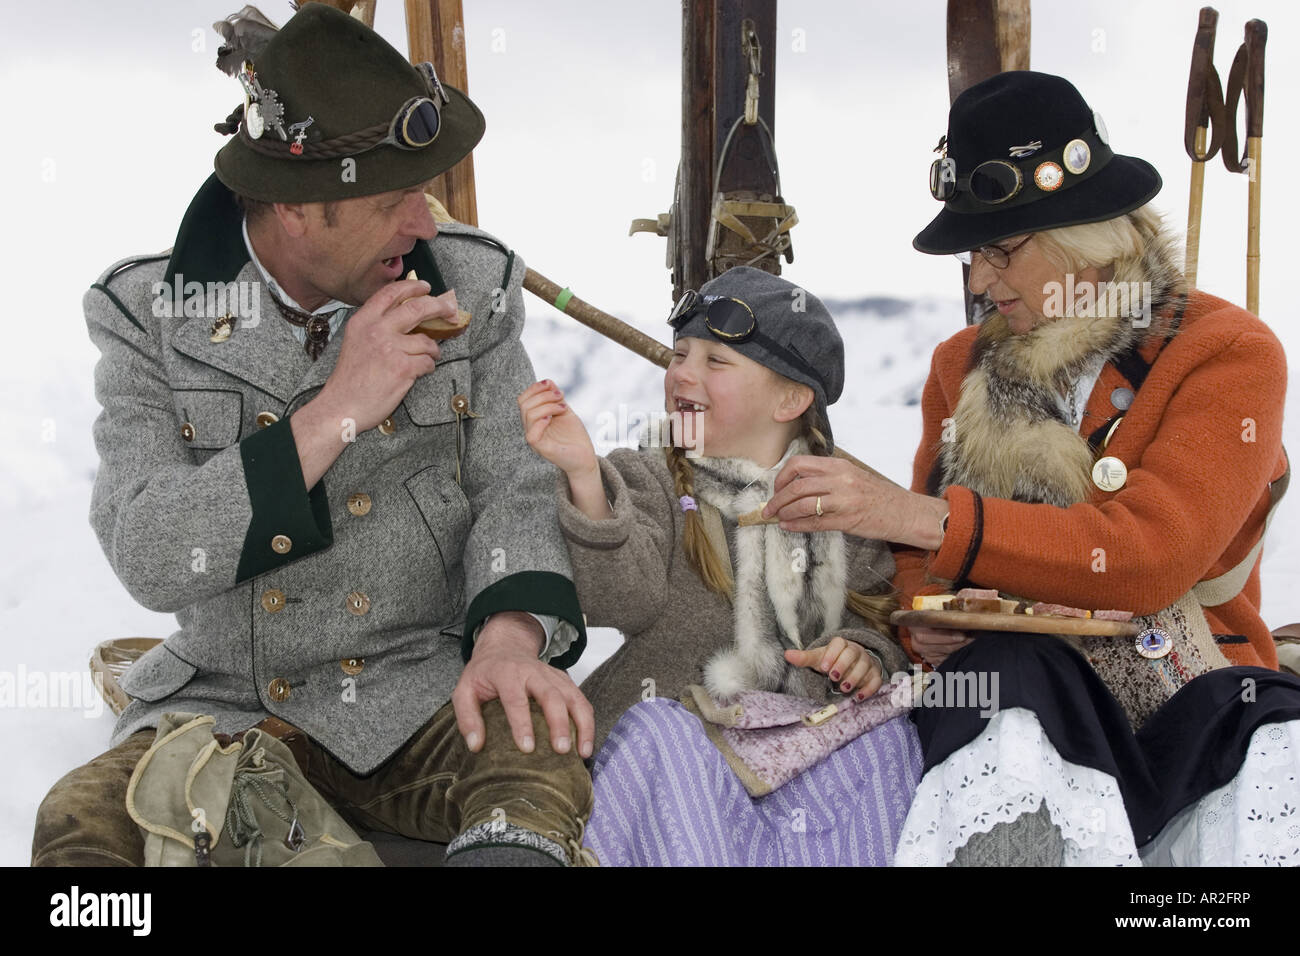 familiy with out-dated clothing on a ski trip having a break, Austria Stock Photo